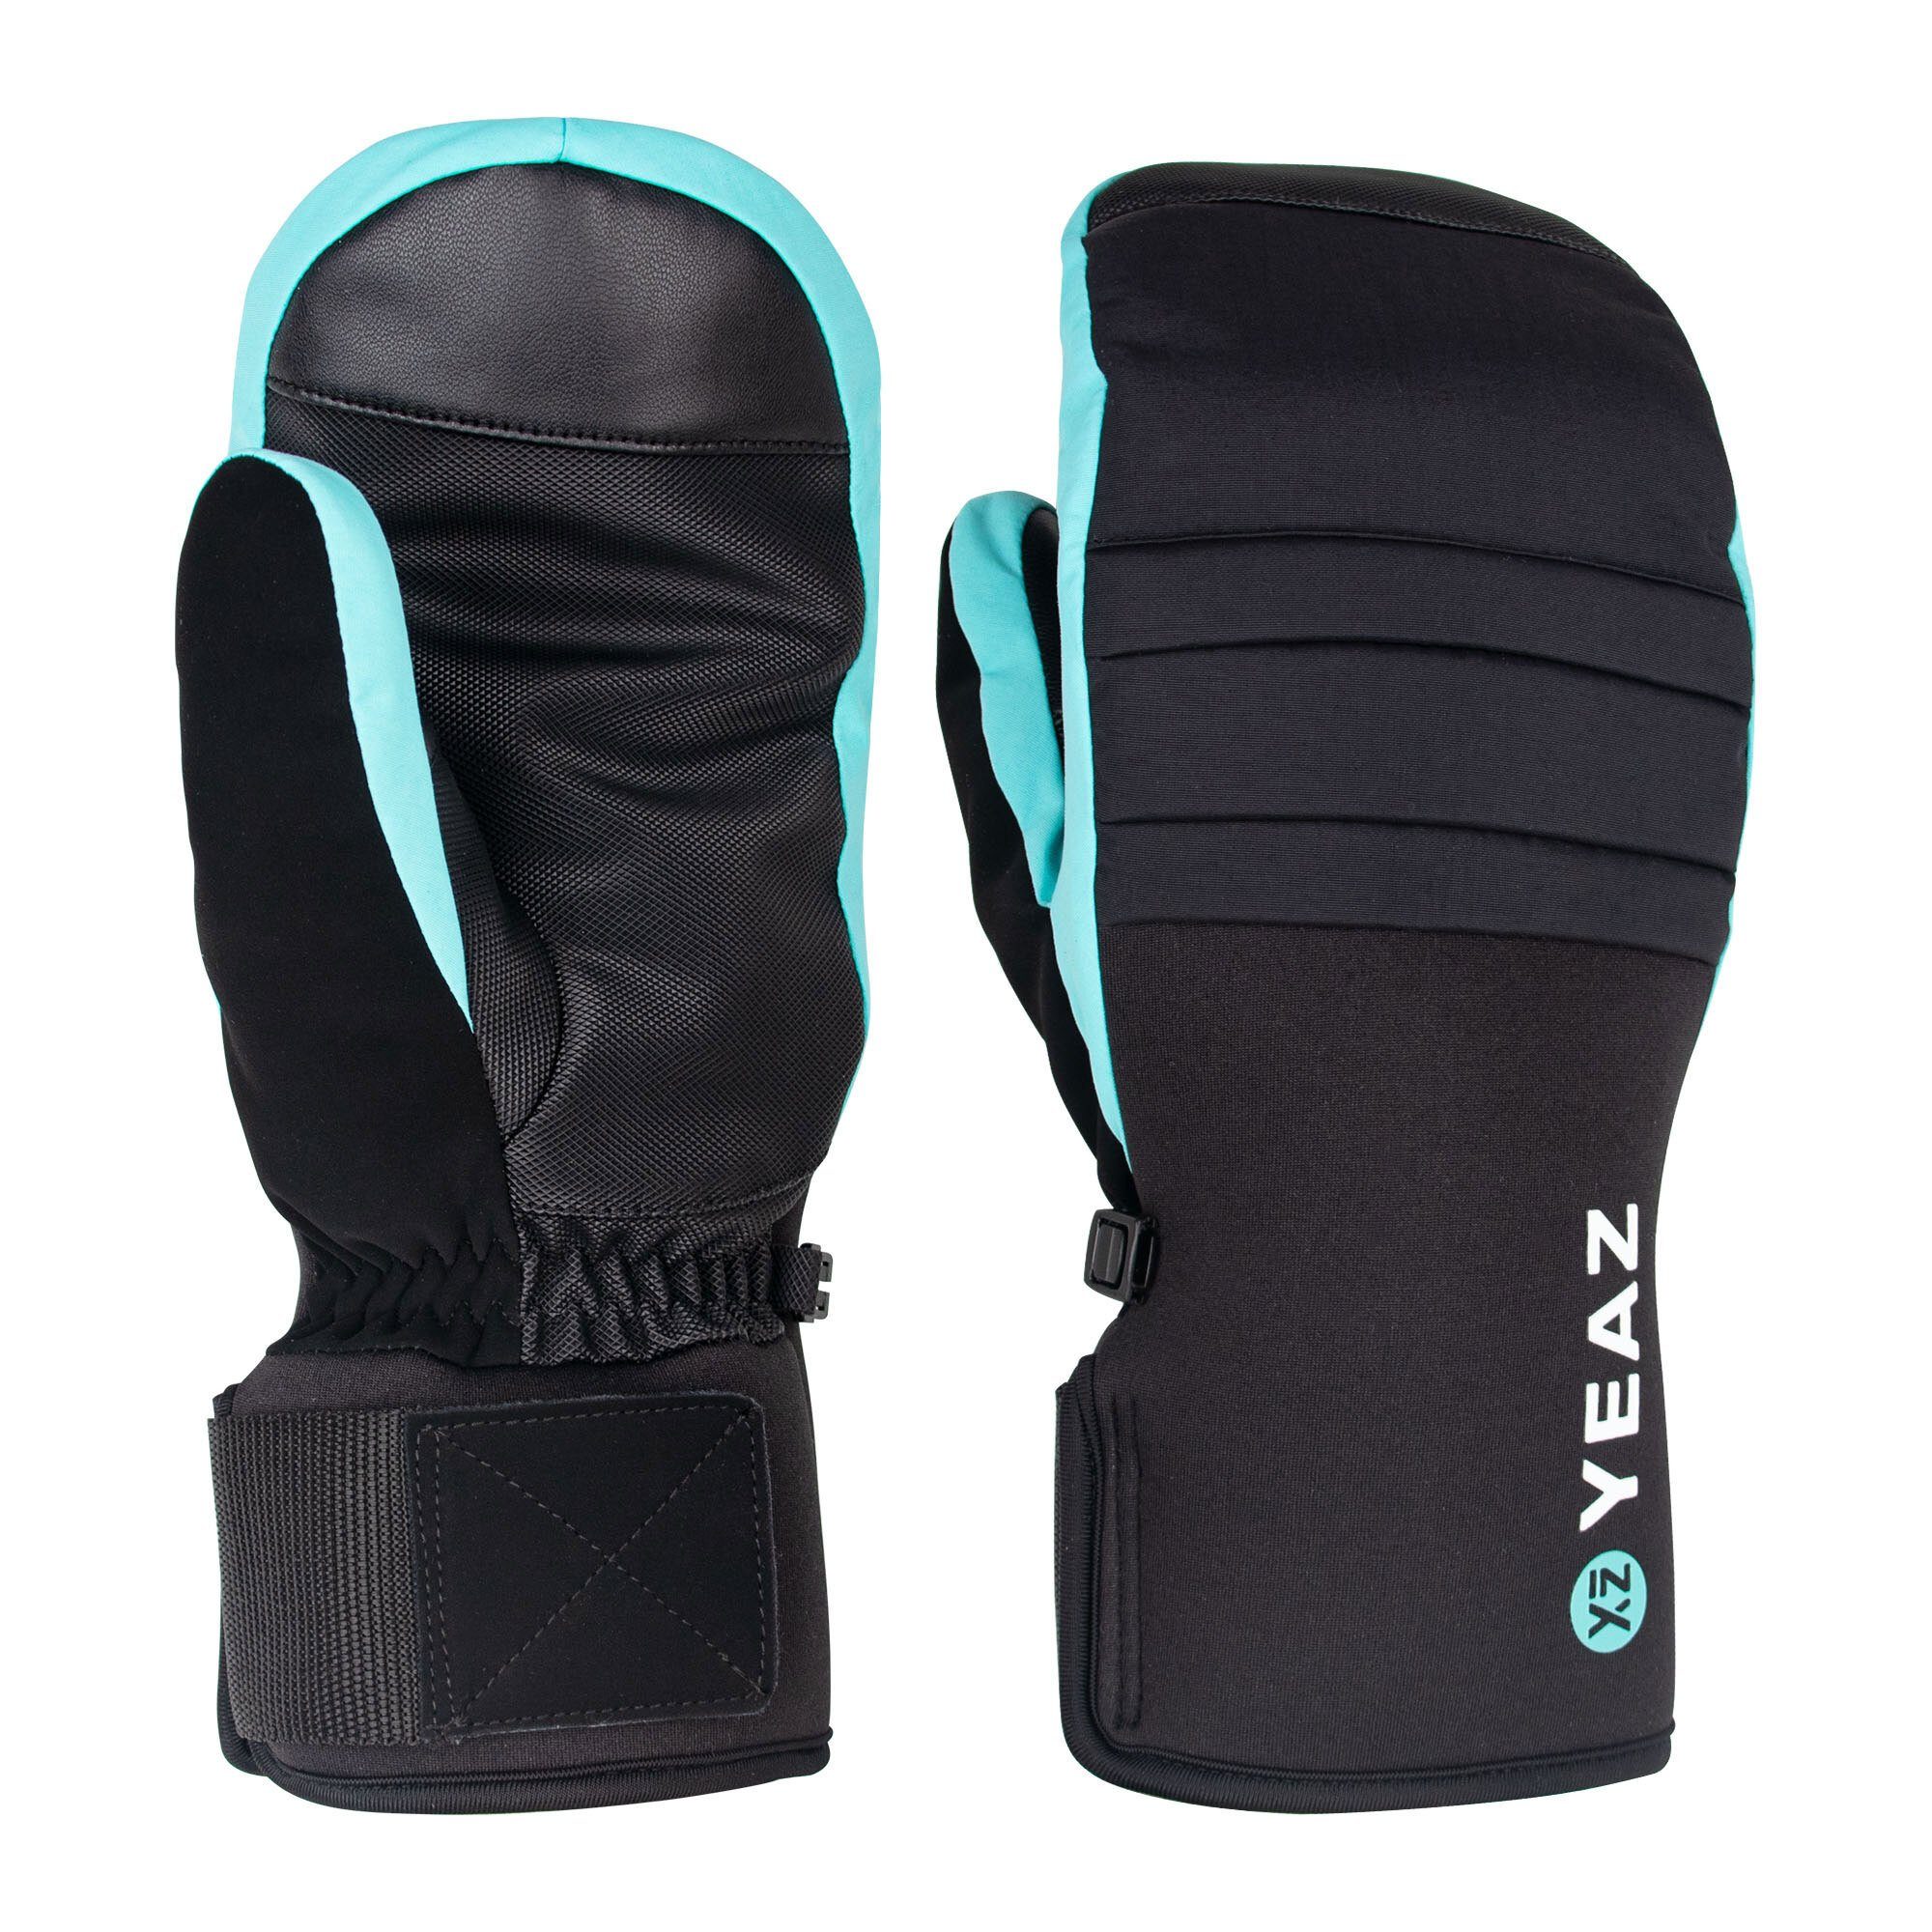 POW Touch-Funktion YEAZ Skihandschuhe & fausthandschuhe Wrist-Band